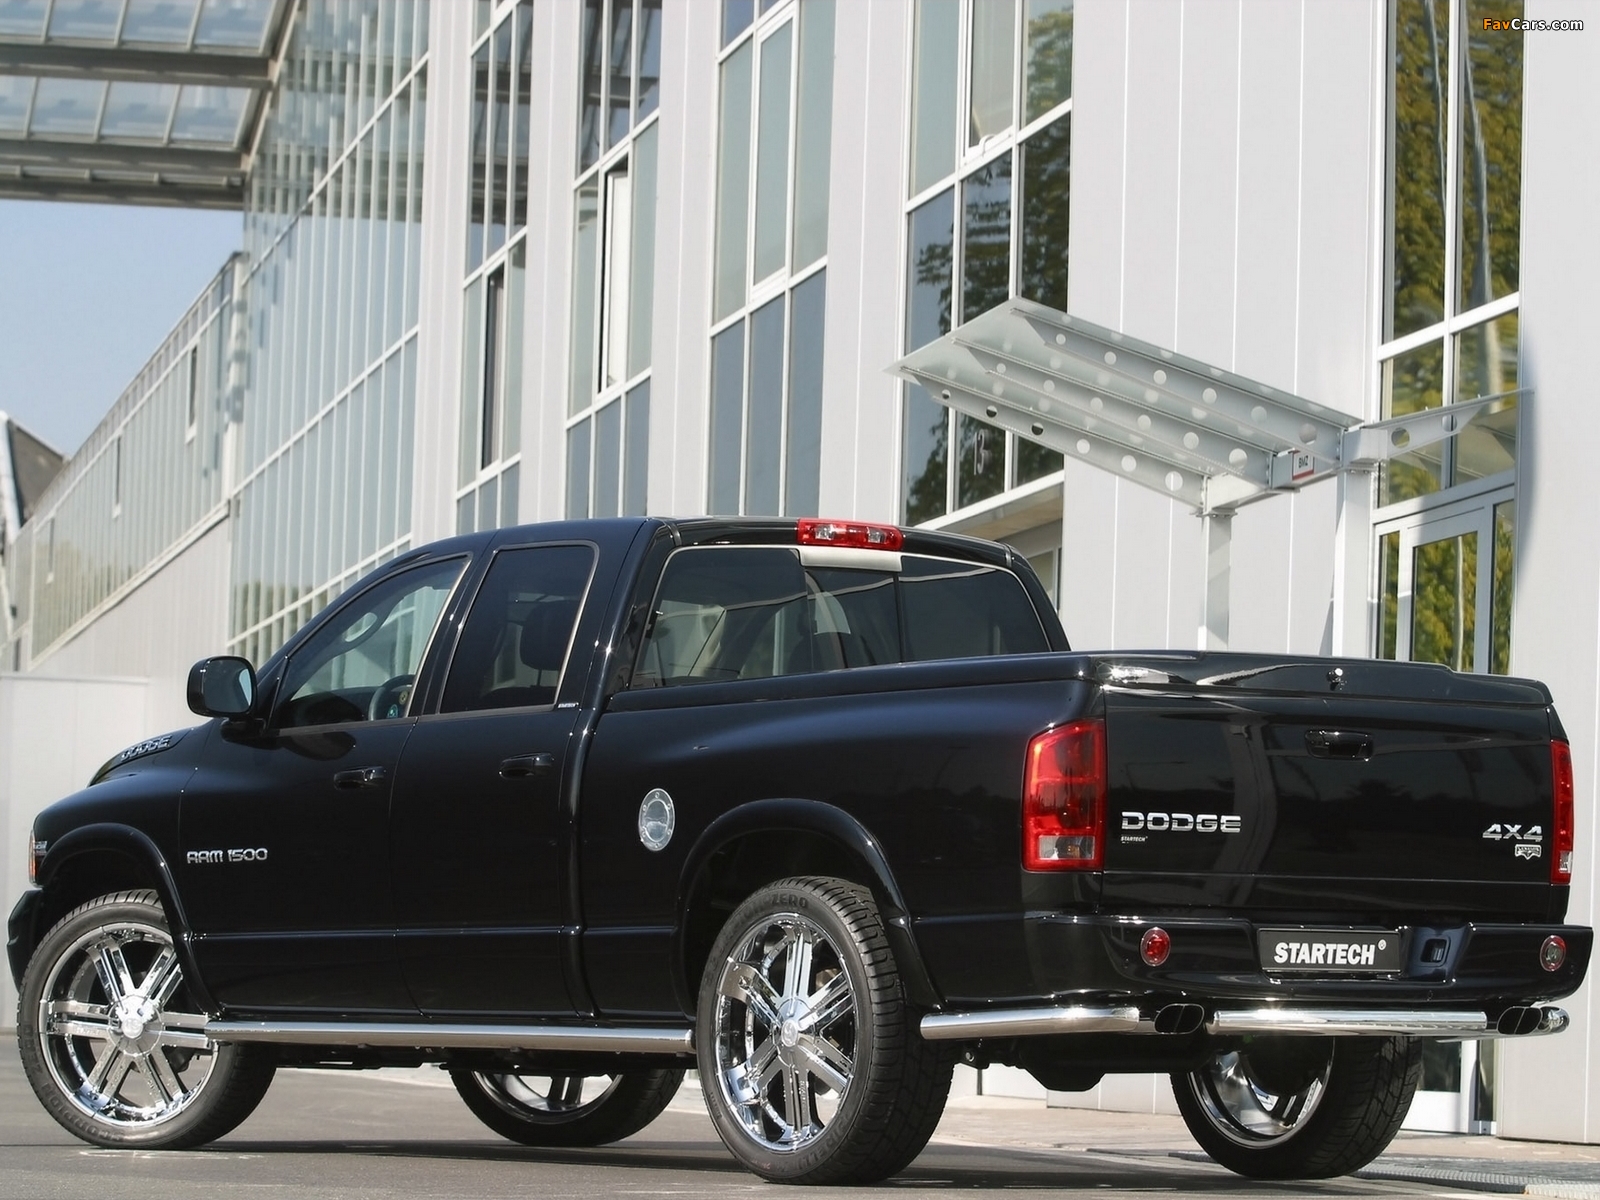 Pictures of Startech Dodge Ram 1500 (1600 x 1200)